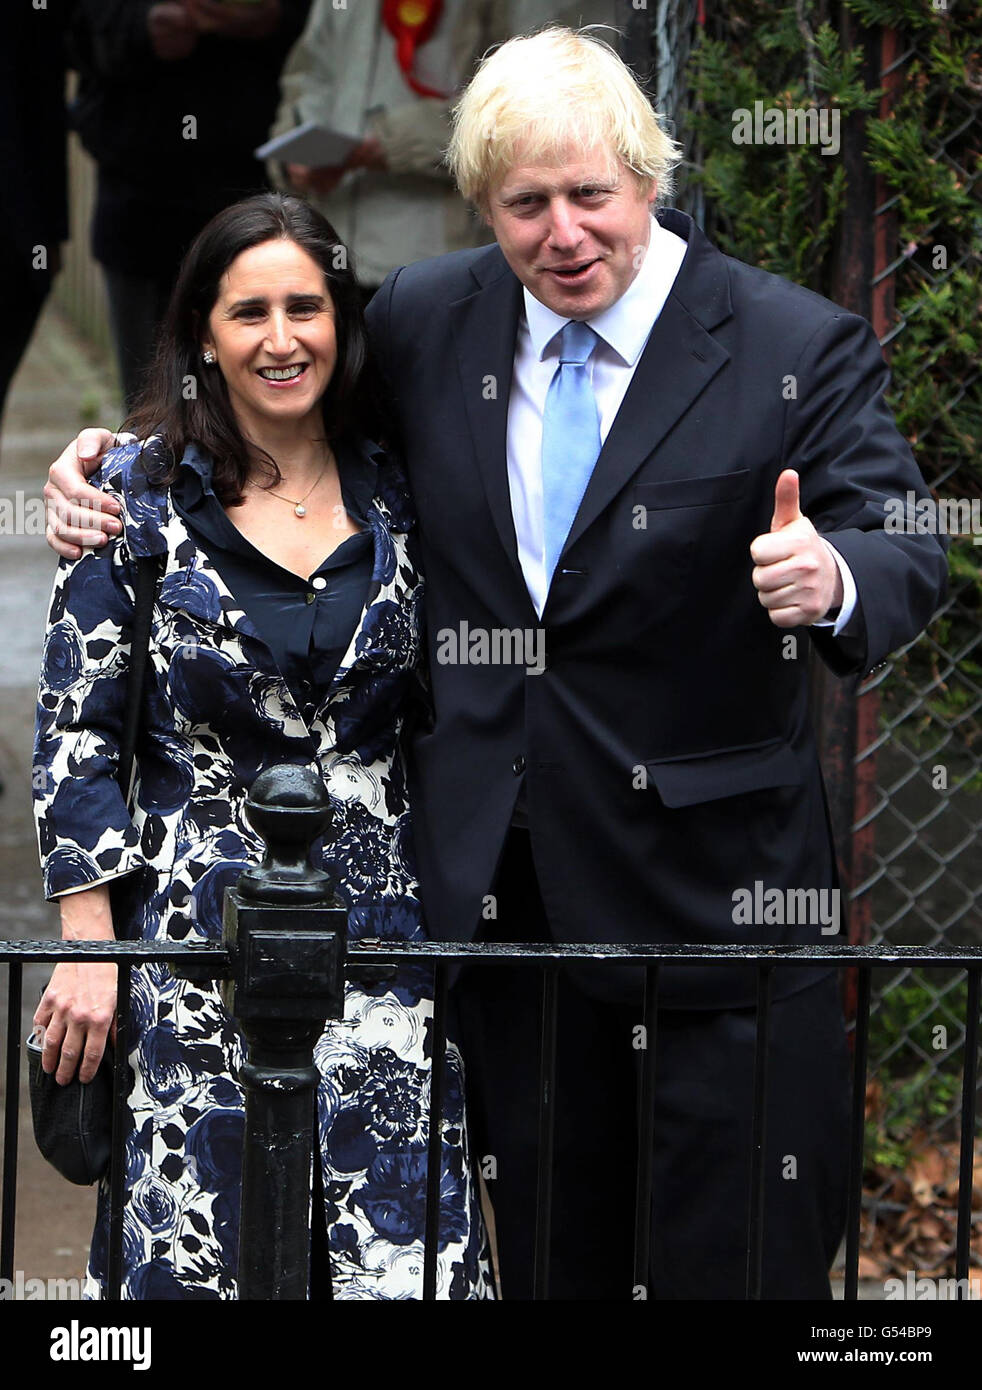 Boris Johnson and his wife Marina Wheeler leave their local polling station in London after voting in the mayoral and council elections. Stock Photo